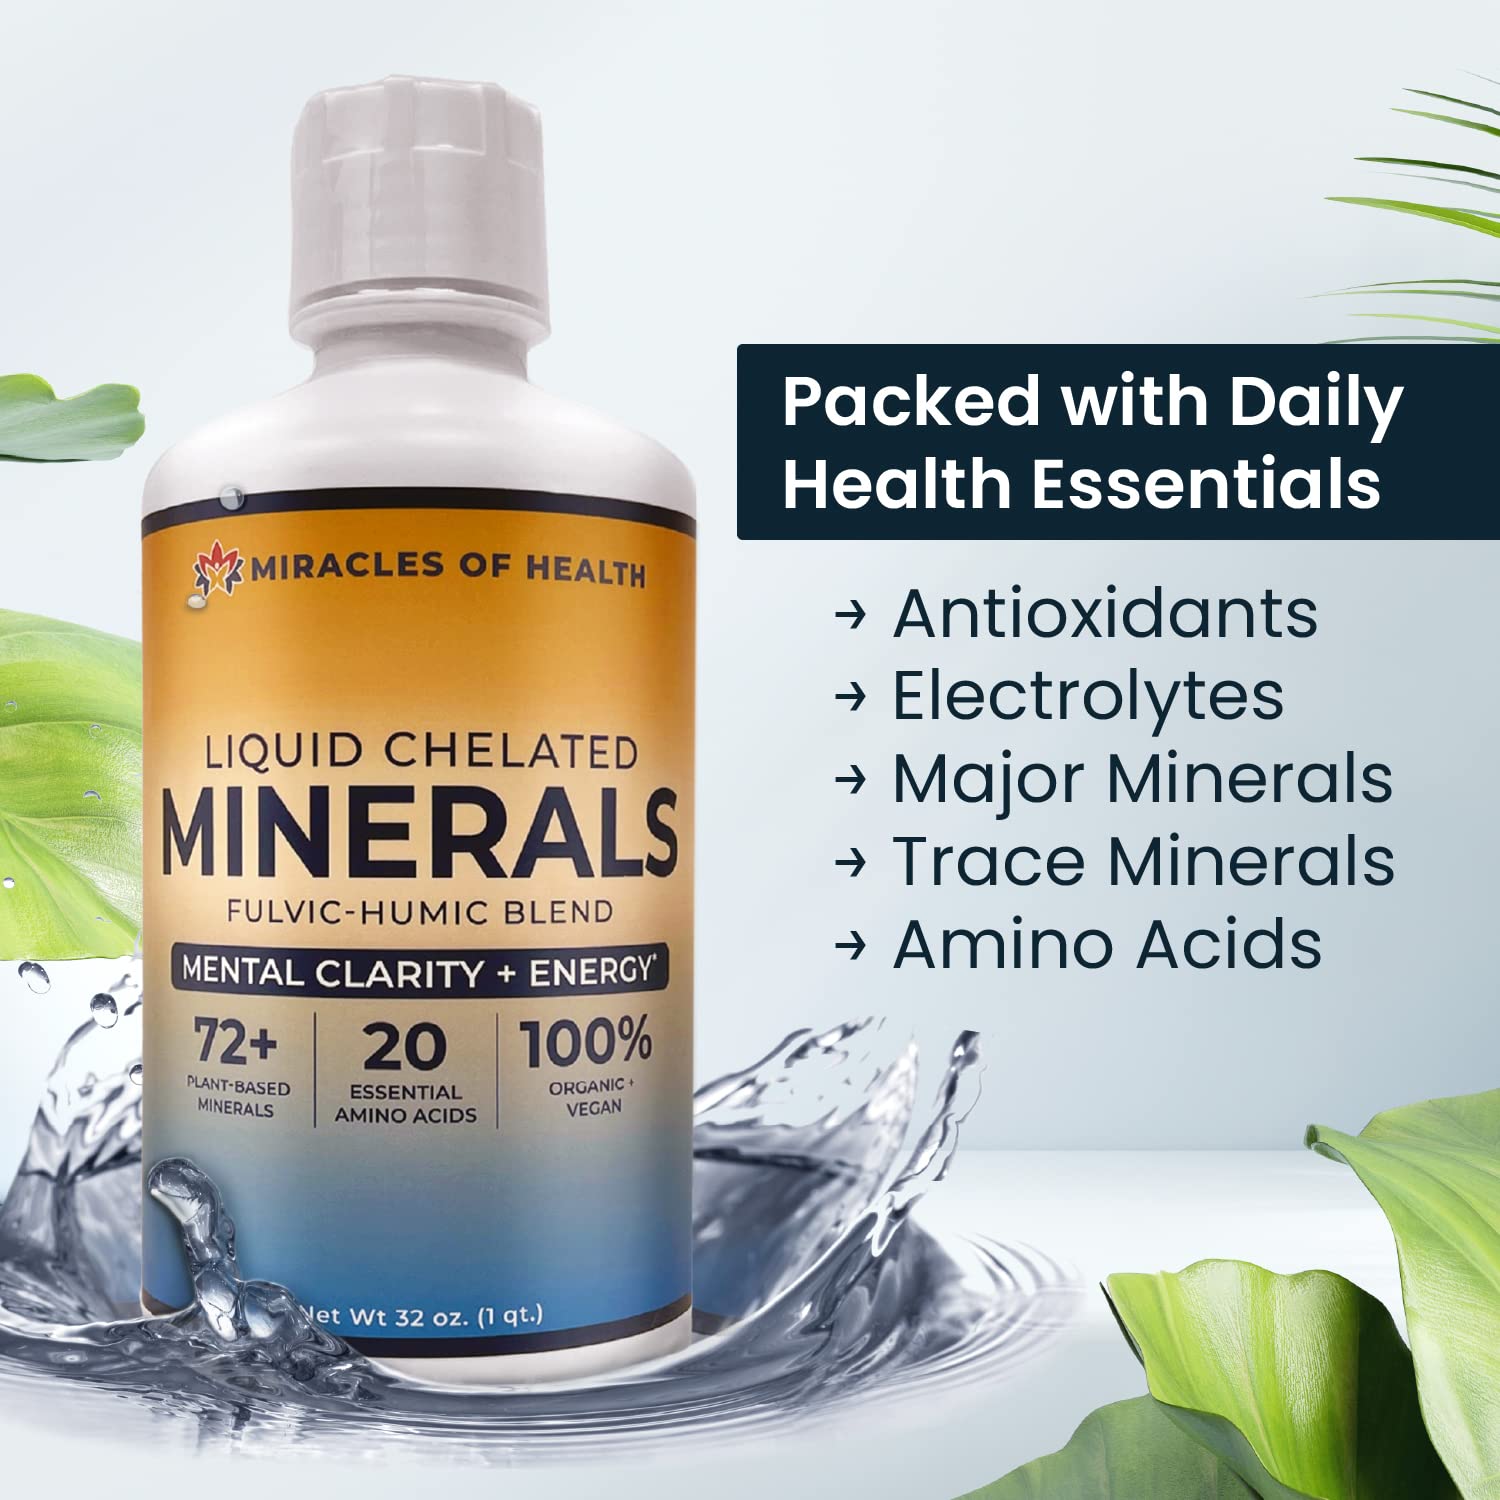 Miracles of Health Liquid Chelated Minerals, 72+ Organic Minerals, 20 Essential Amino Acids | Plant Derived, Humic Fulvic Blend, Essential Major and Minor Trace Minerals | Fast absorption, Energy, Focus | 32 oz bottle - 1 Month Supply